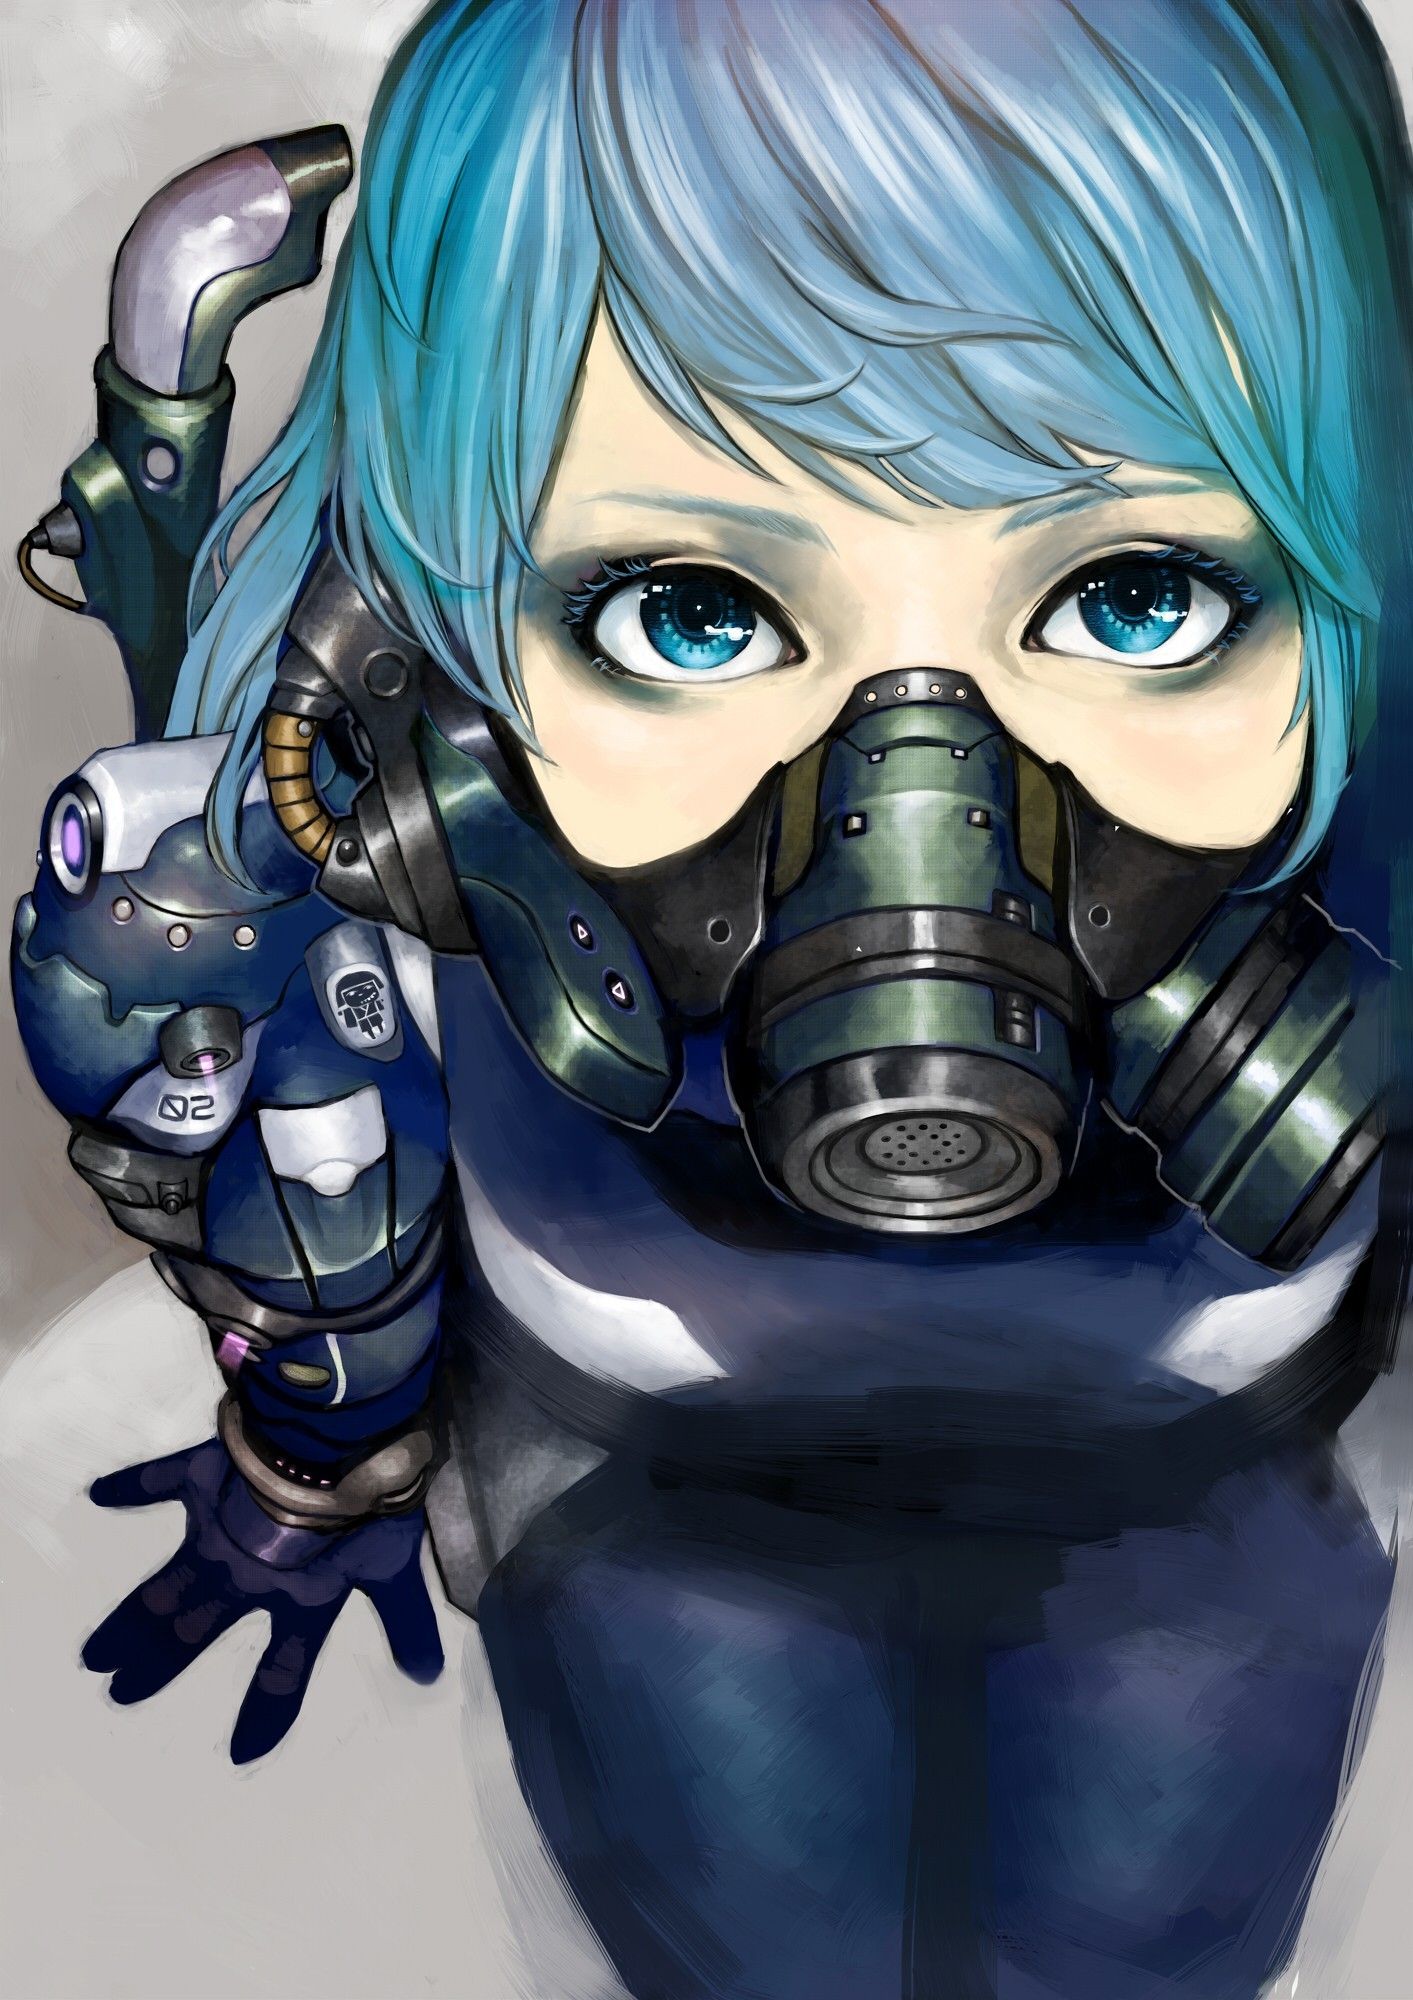 Anime Girl Gas Mask Wallpapers Wallpaper Cave 9670